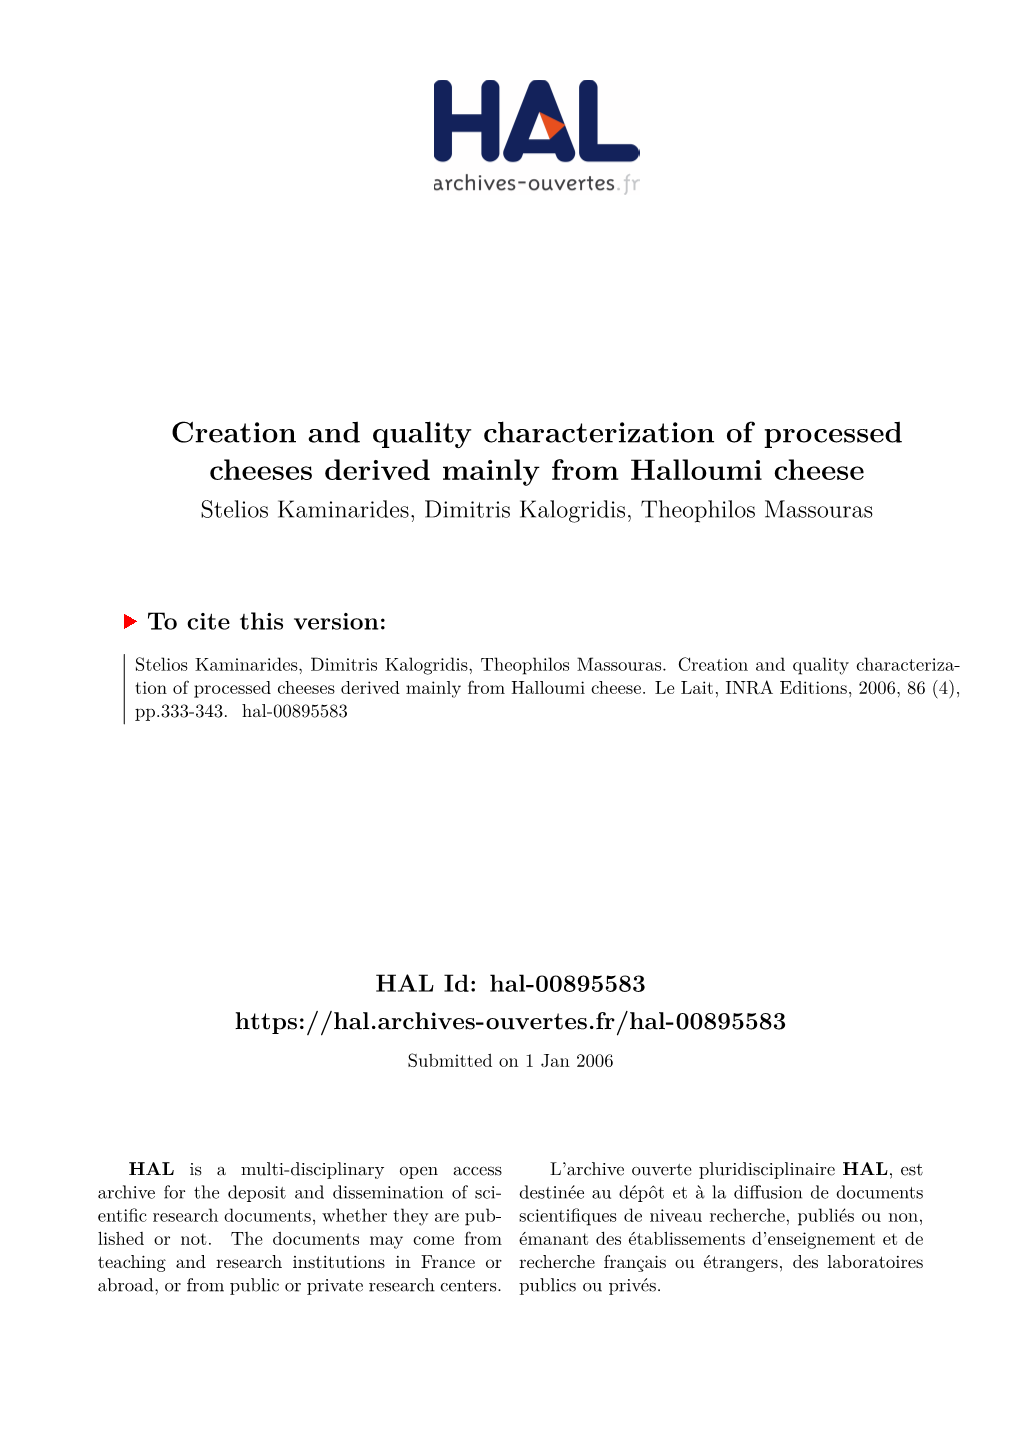 Creation and Quality Characterization of Processed Cheeses Derived Mainly from Halloumi Cheese Stelios Kaminarides, Dimitris Kalogridis, Theophilos Massouras